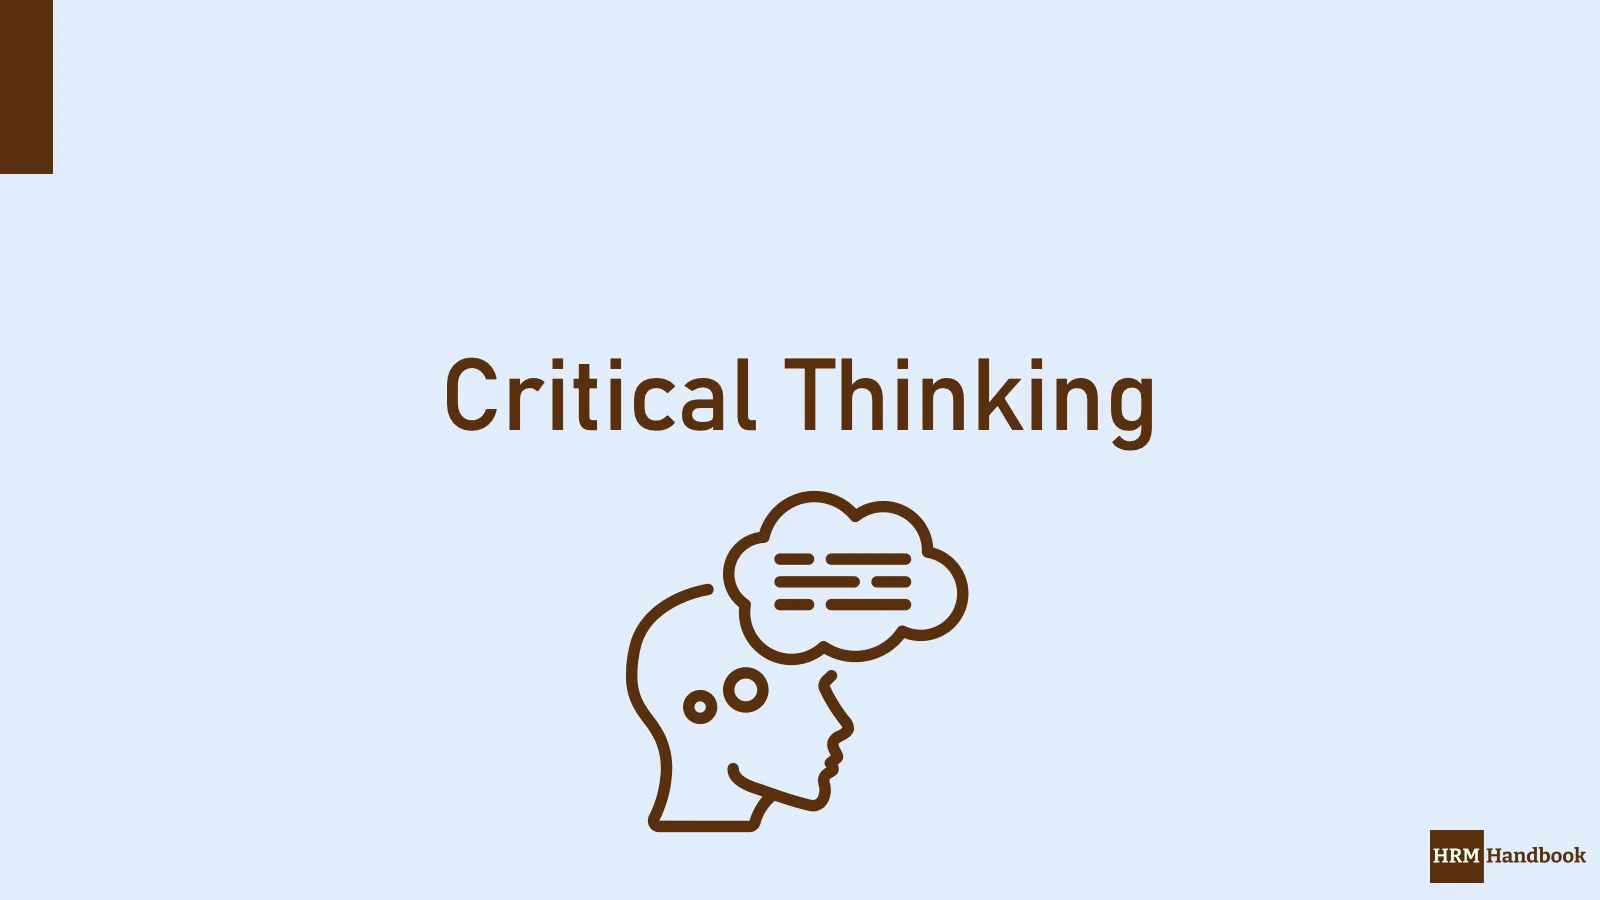 principles of critical thinking hr